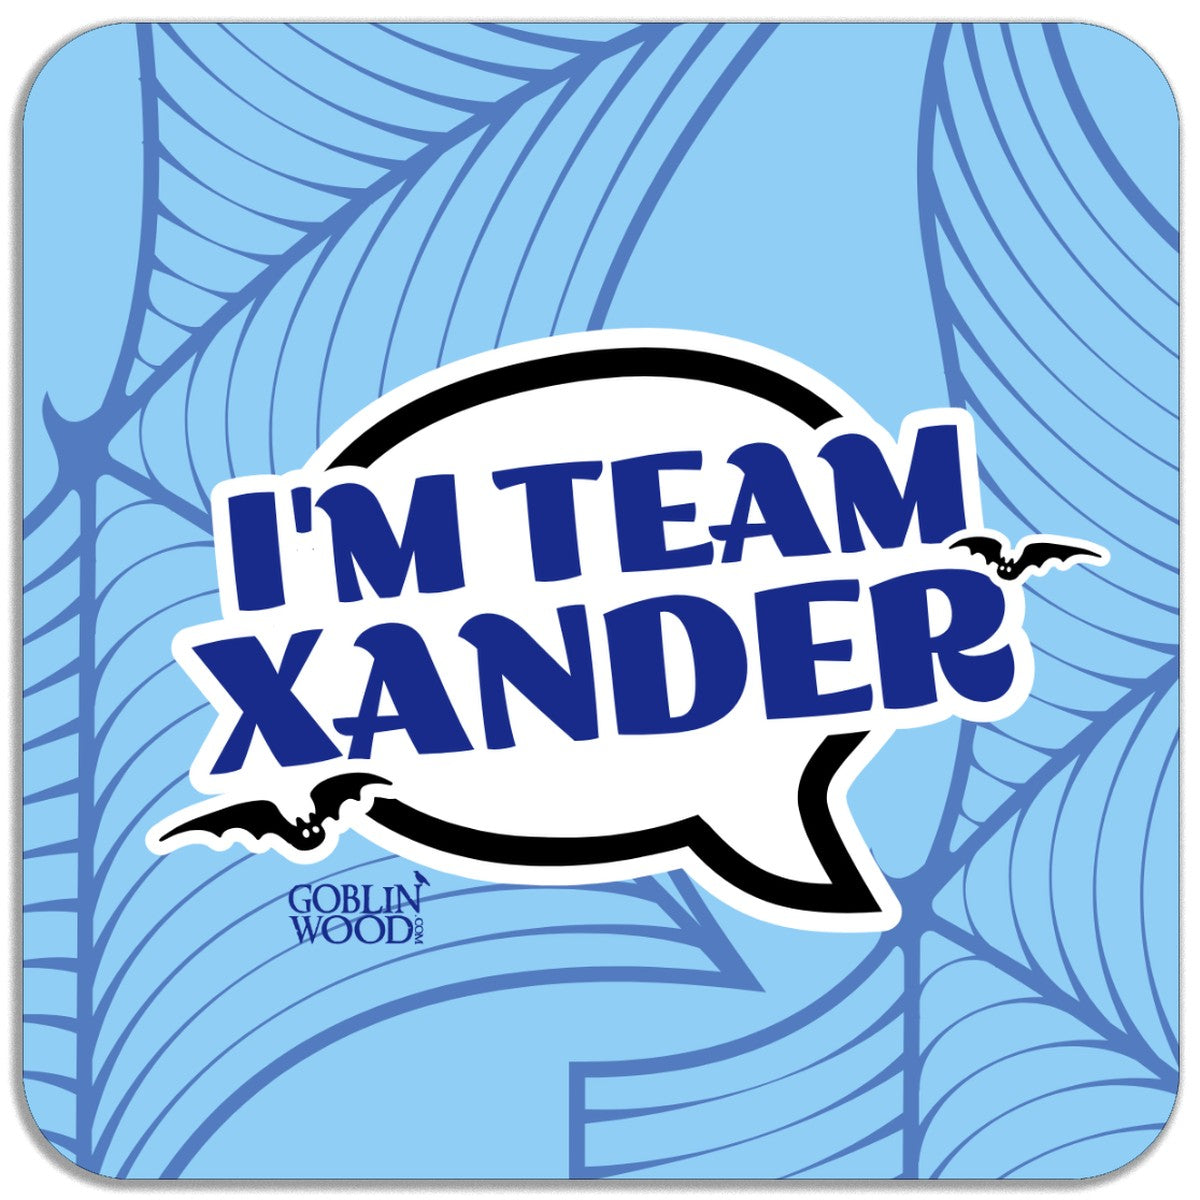 I'm Team Xander! Speech Bubble Magnet - Buffy Inspired - Goblin Wood Exclusive